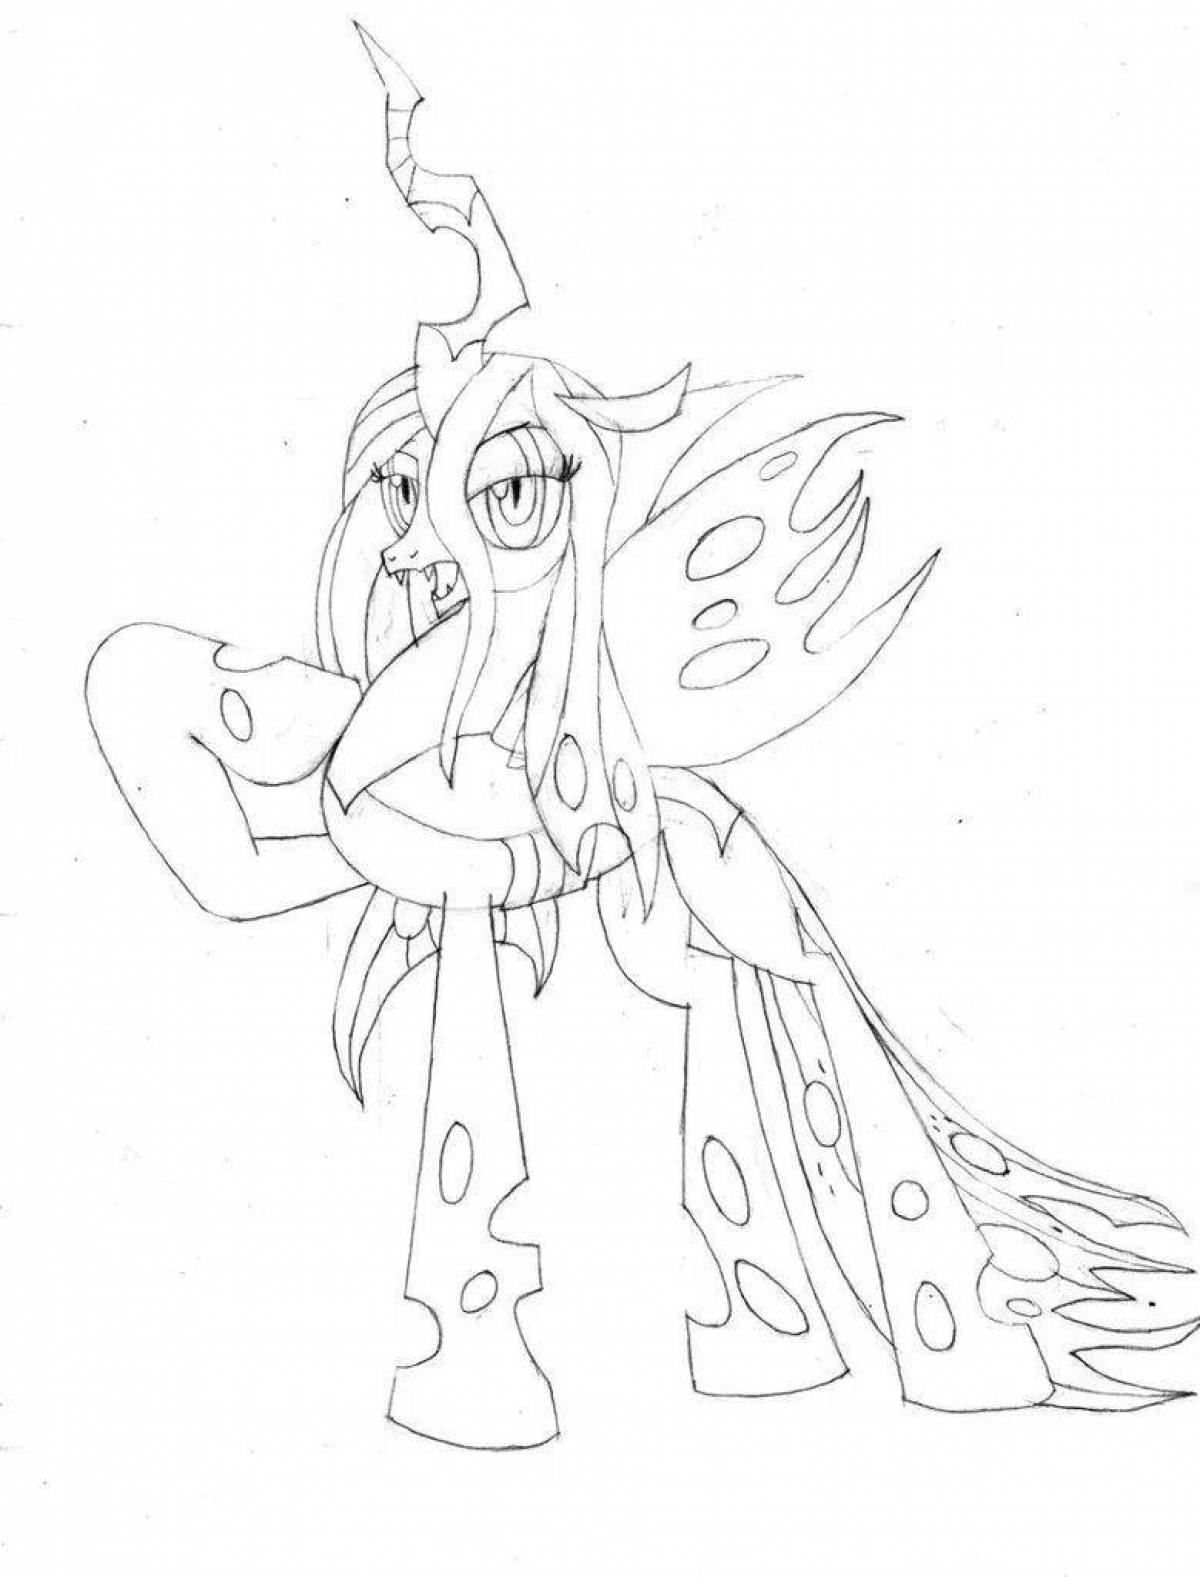 Fairytale pony chrysalis coloring page